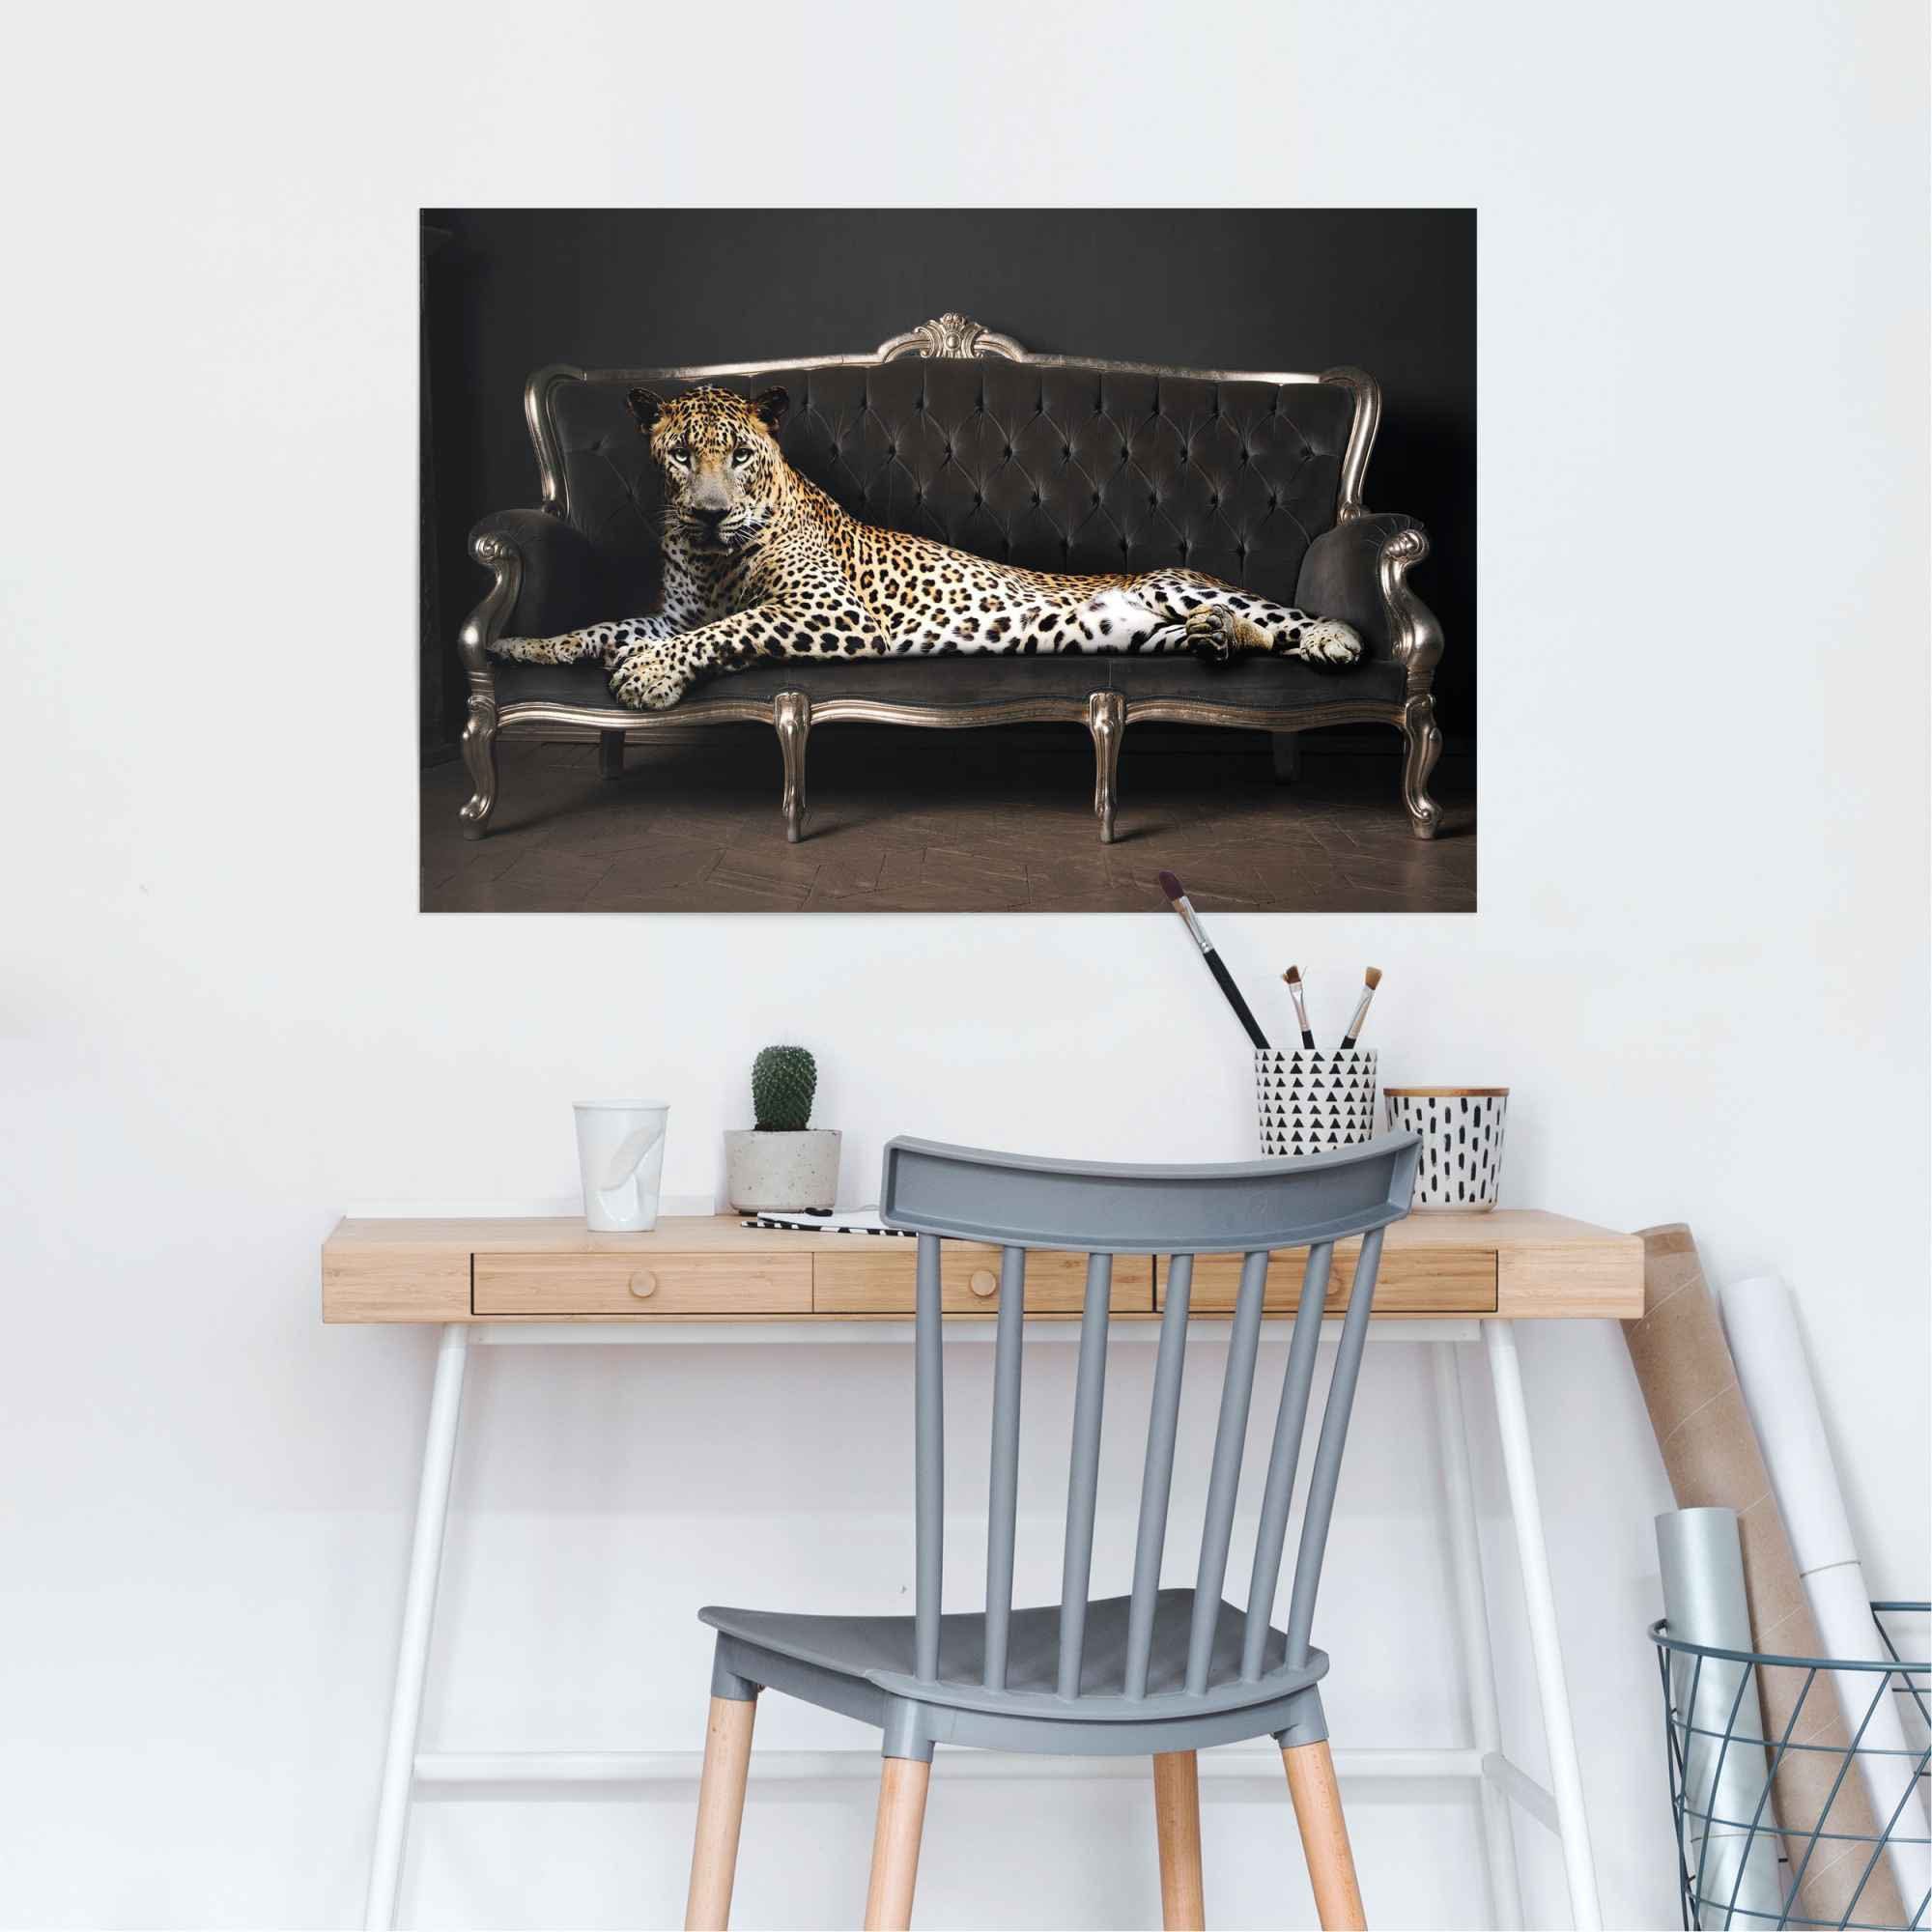 Leopard Poster Reinders! (1 Chic Liegend Luxus - Panther St) - Relax, -